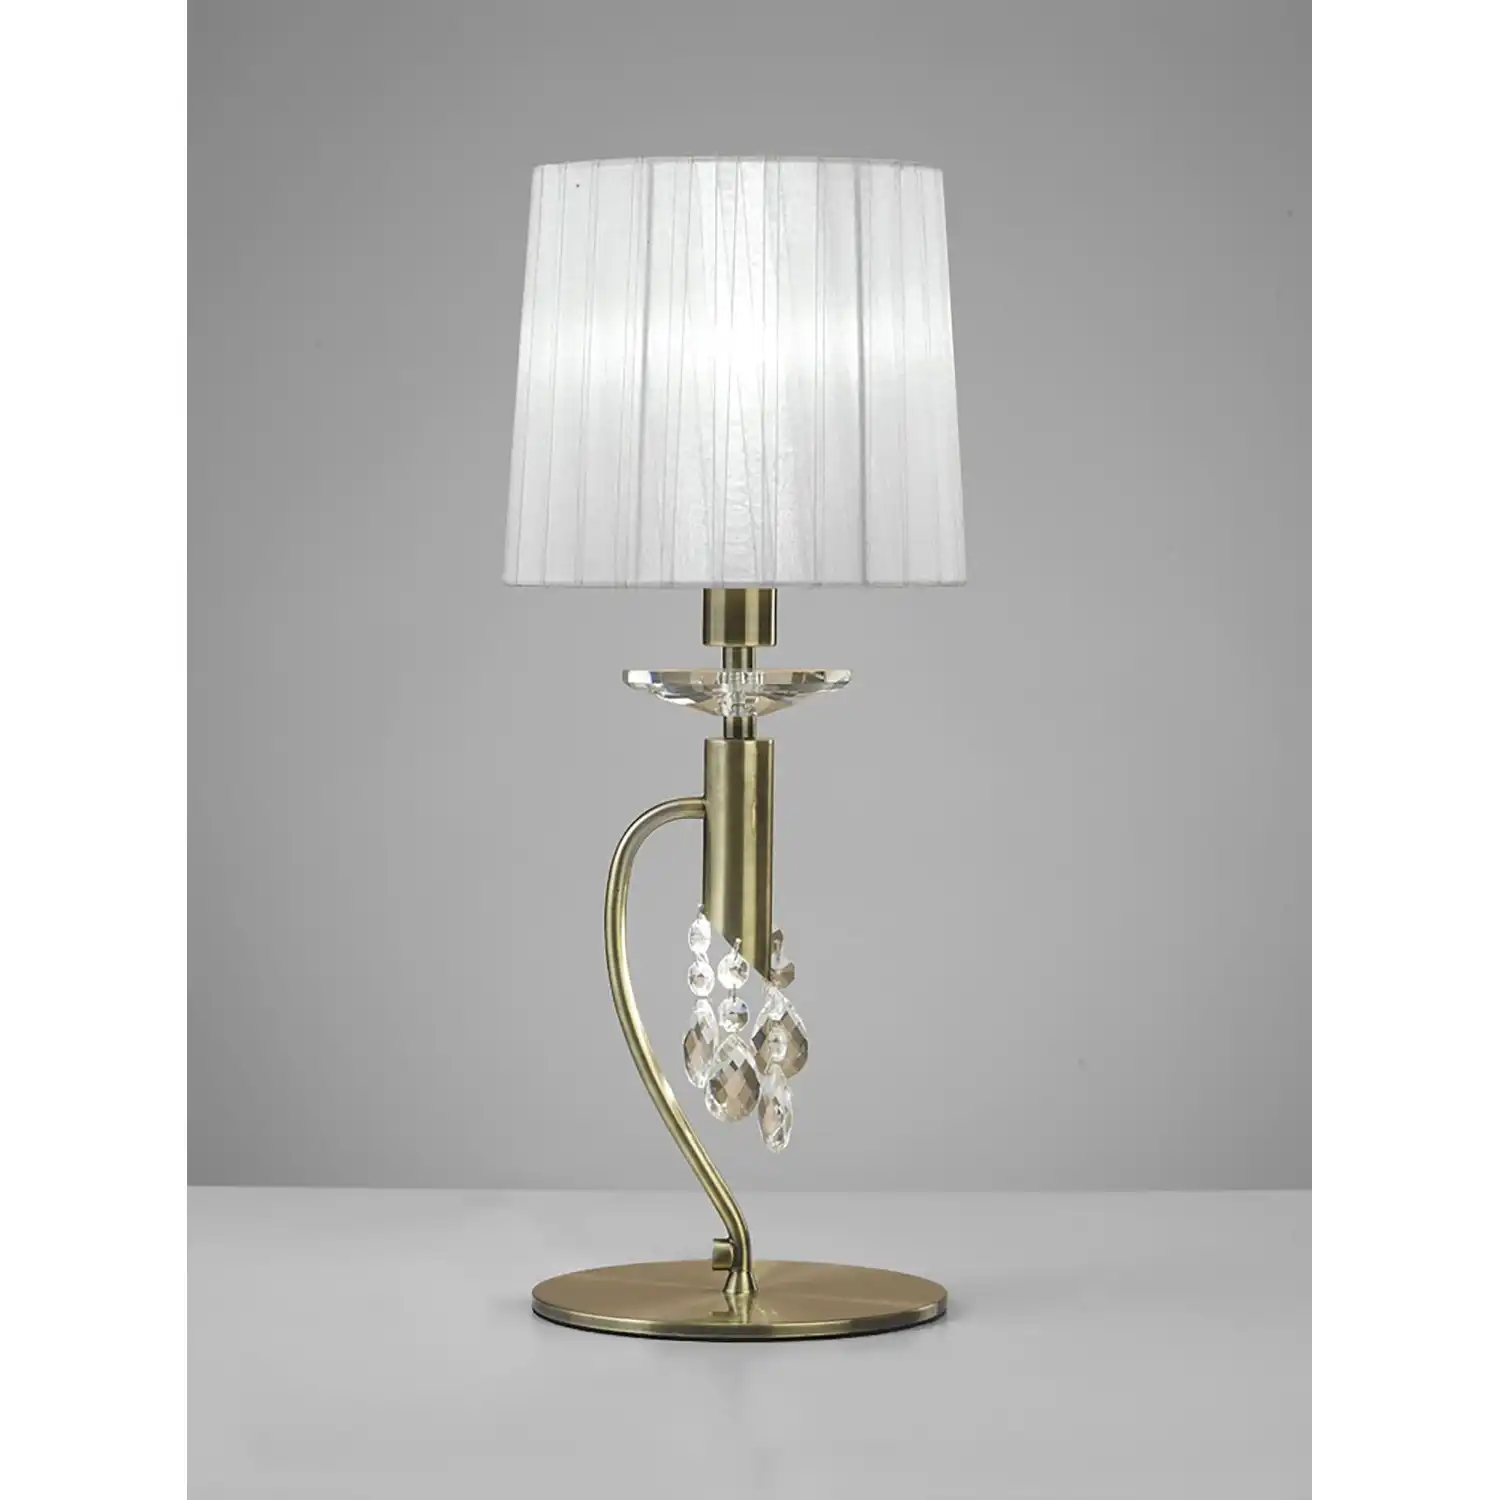 Tiffany Table Lamp 1+1 Light E14+G9, Antique Brass With White Shade And Clear Crystal